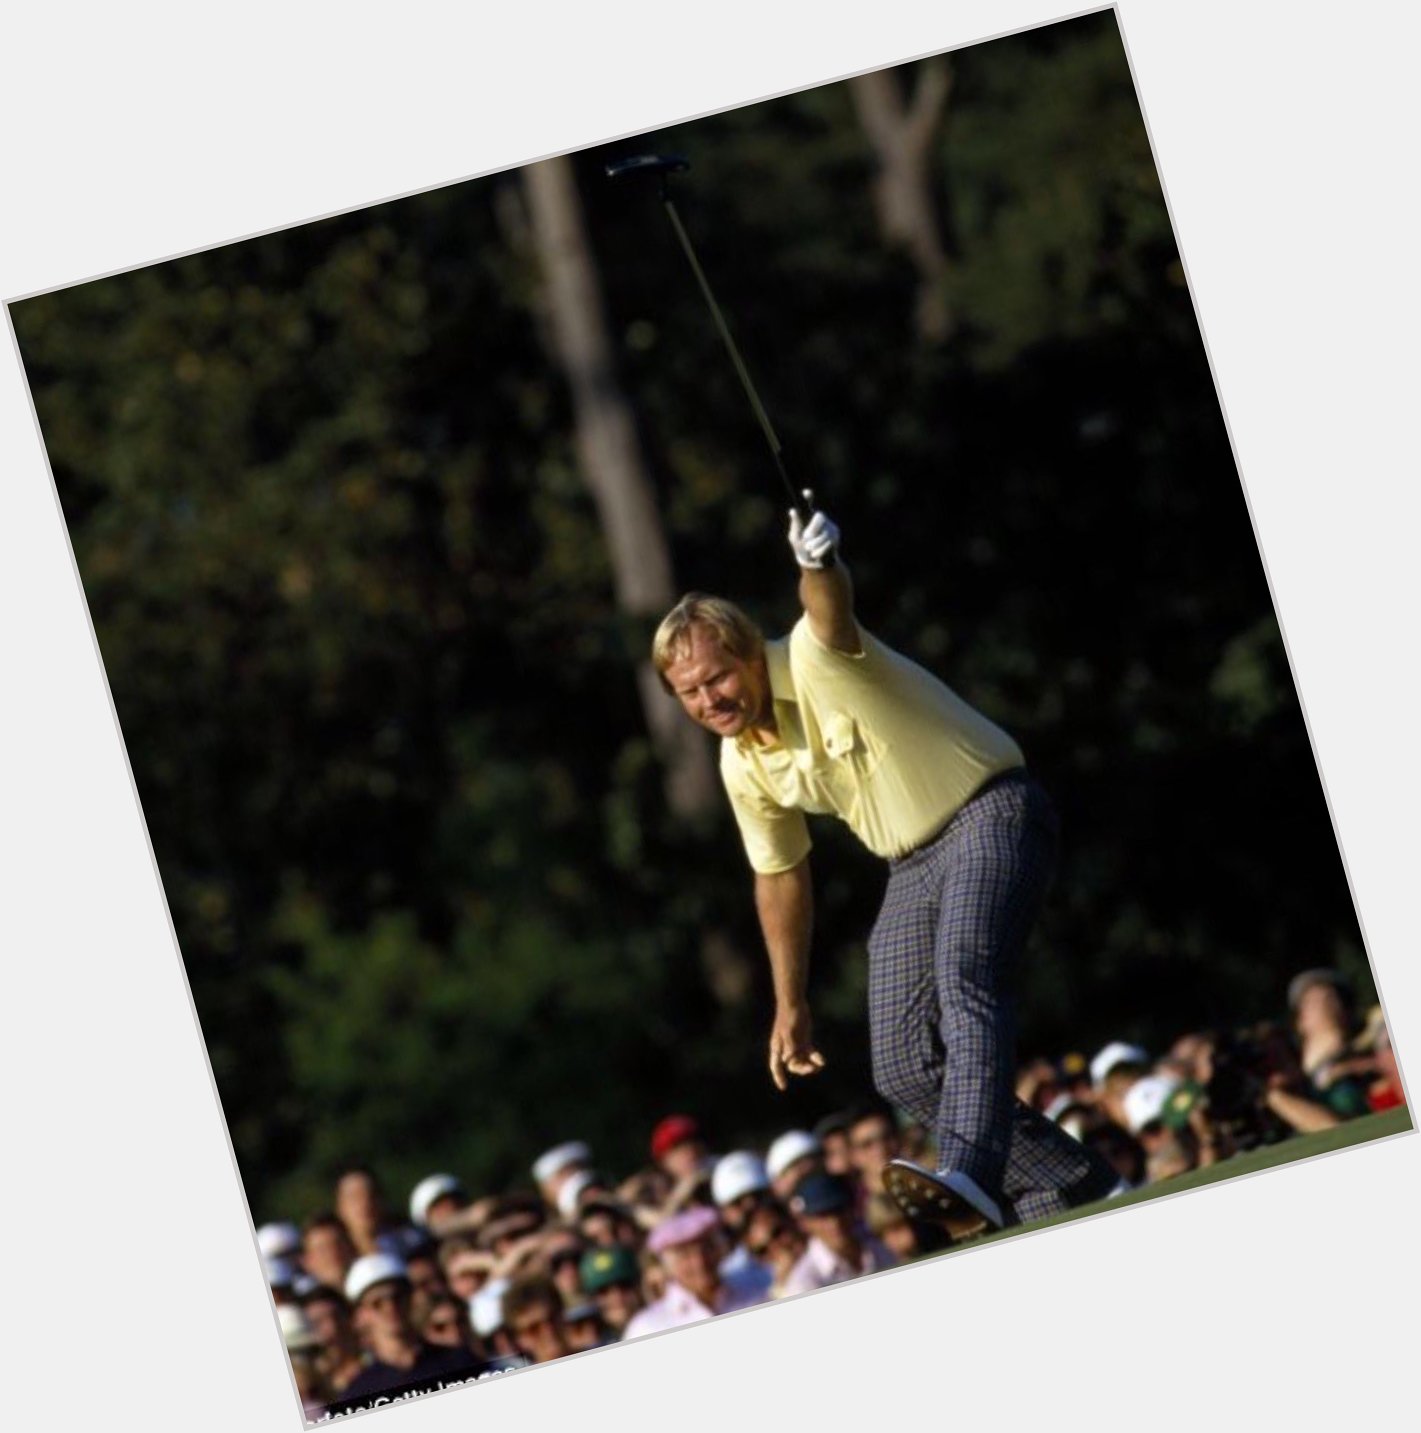 Happy Birthday to one of golfs all time greats. Mr Jack Nicklaus. 18 Majors to his name. Legend... 